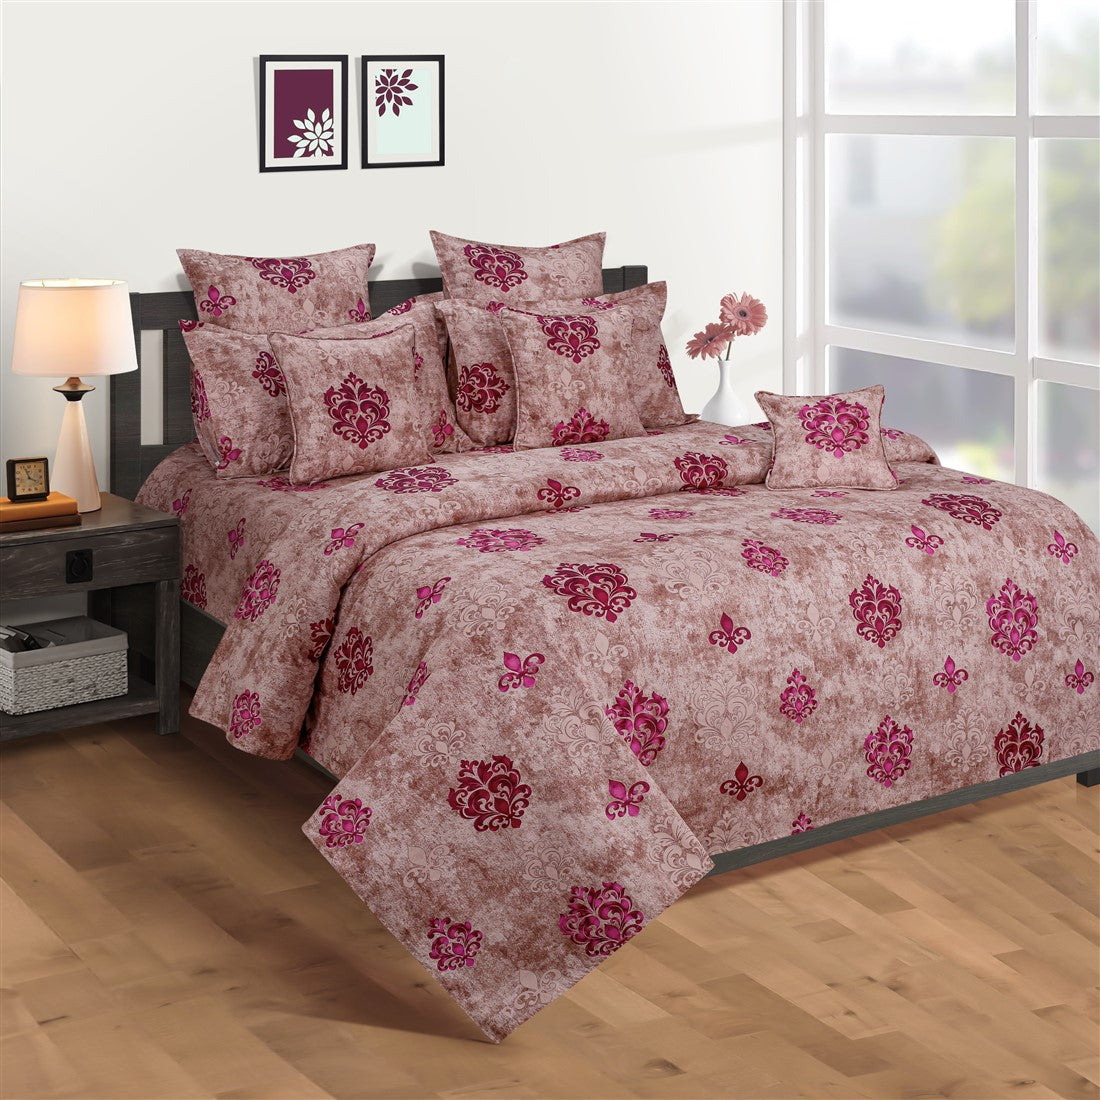 Detec™ Printed Zinnia Cotton Bed Sheet - 90 x 108 Inches